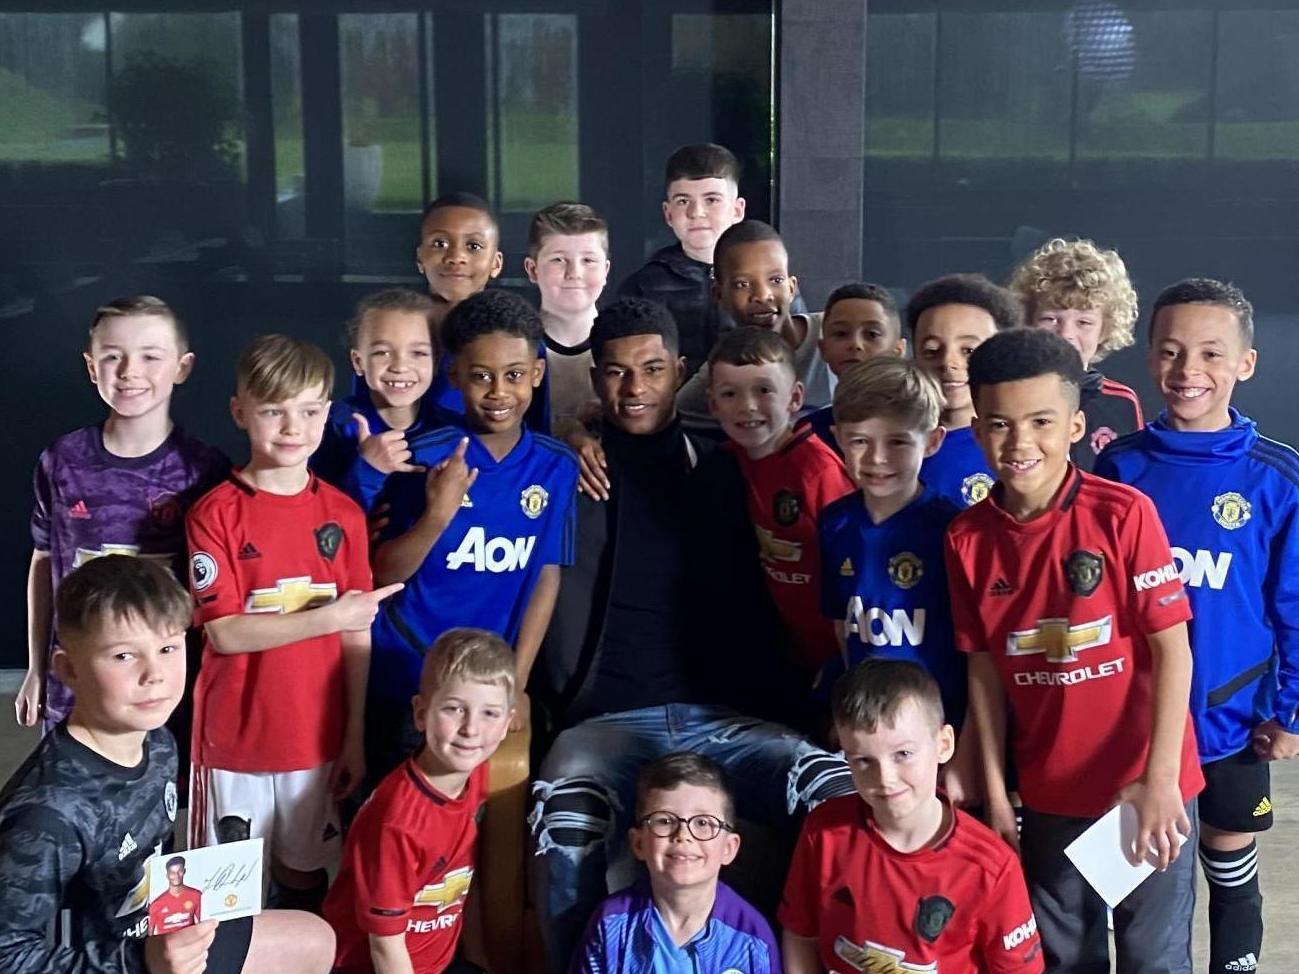 Marcus Rashford is pressuring the government to perform a U-turn on the decision to end free school meal vouchers